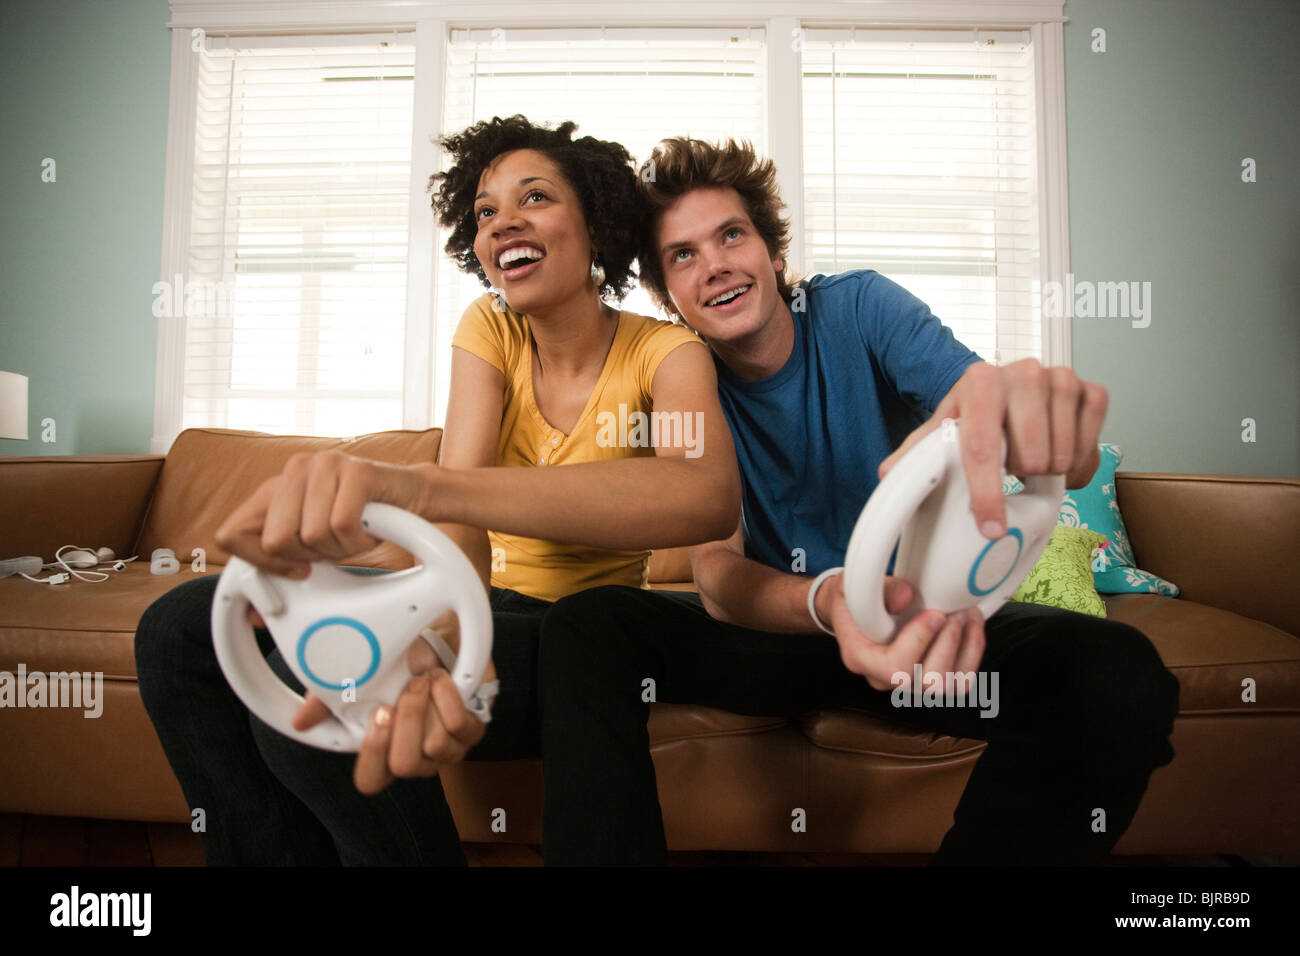 USA, Utah, Provo, young couple playing video games in living room Stock Photo